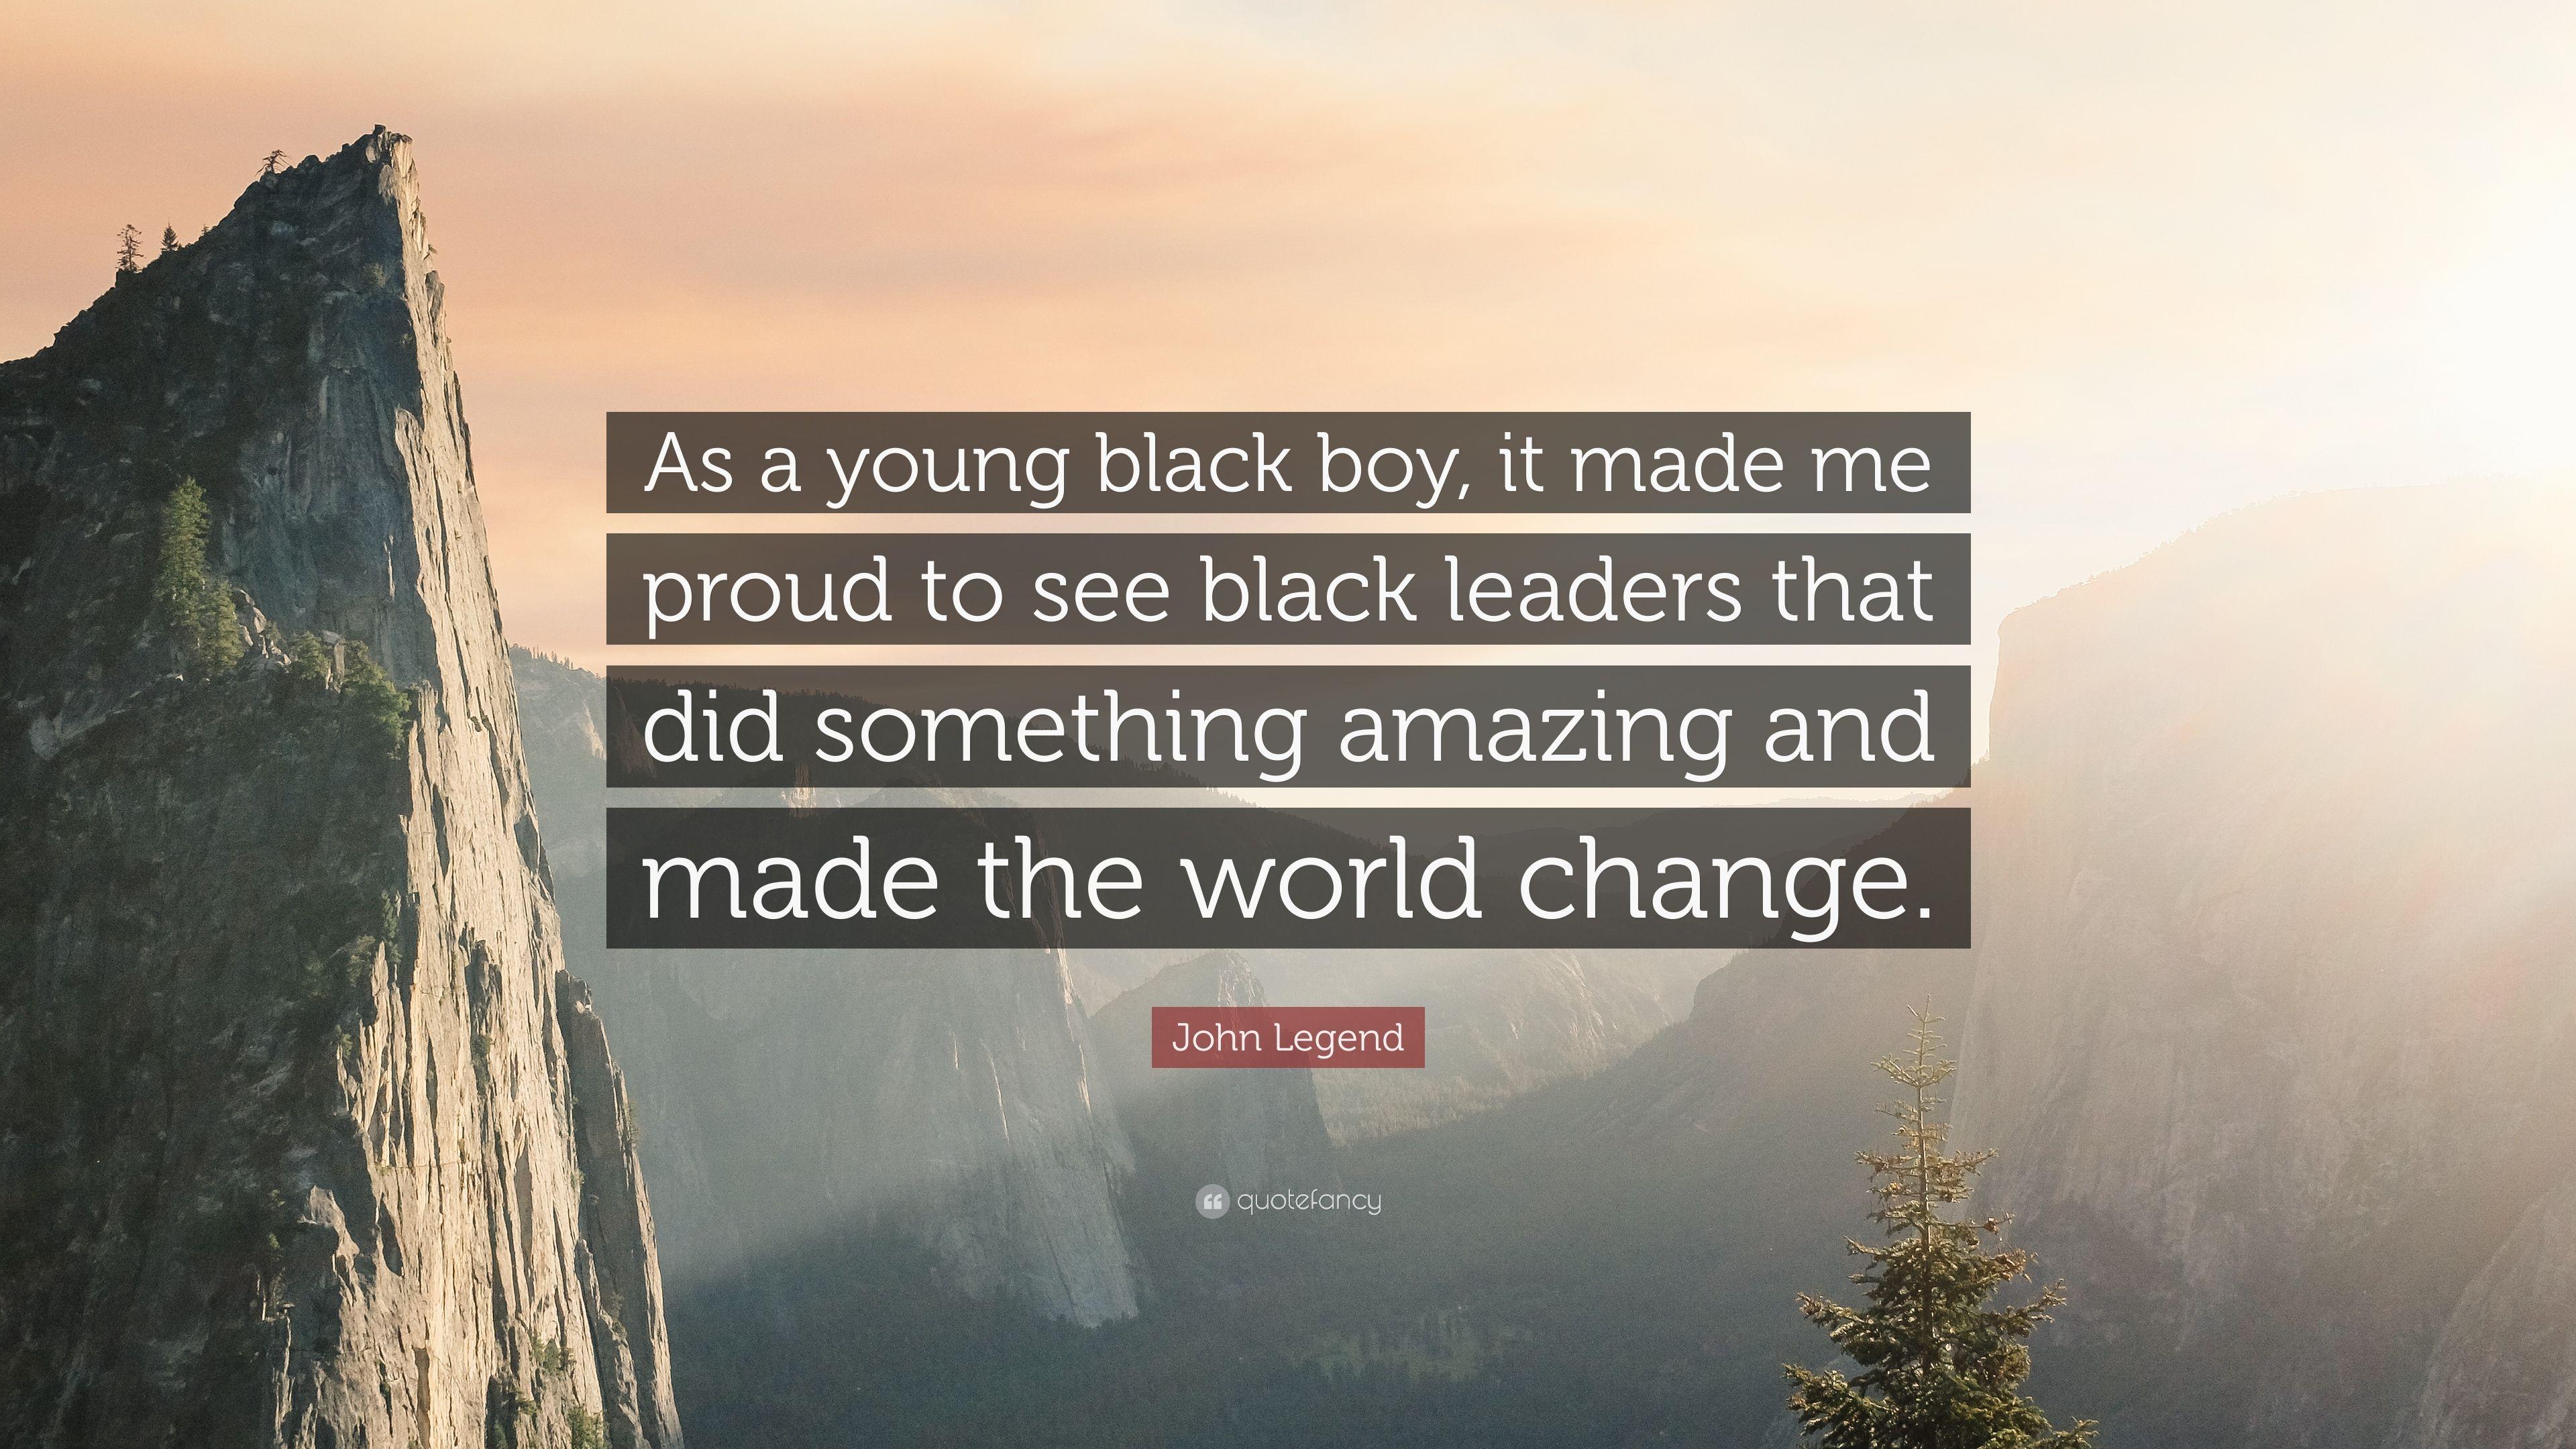 John Legend Quote: “As a young black boy, it made me proud to see